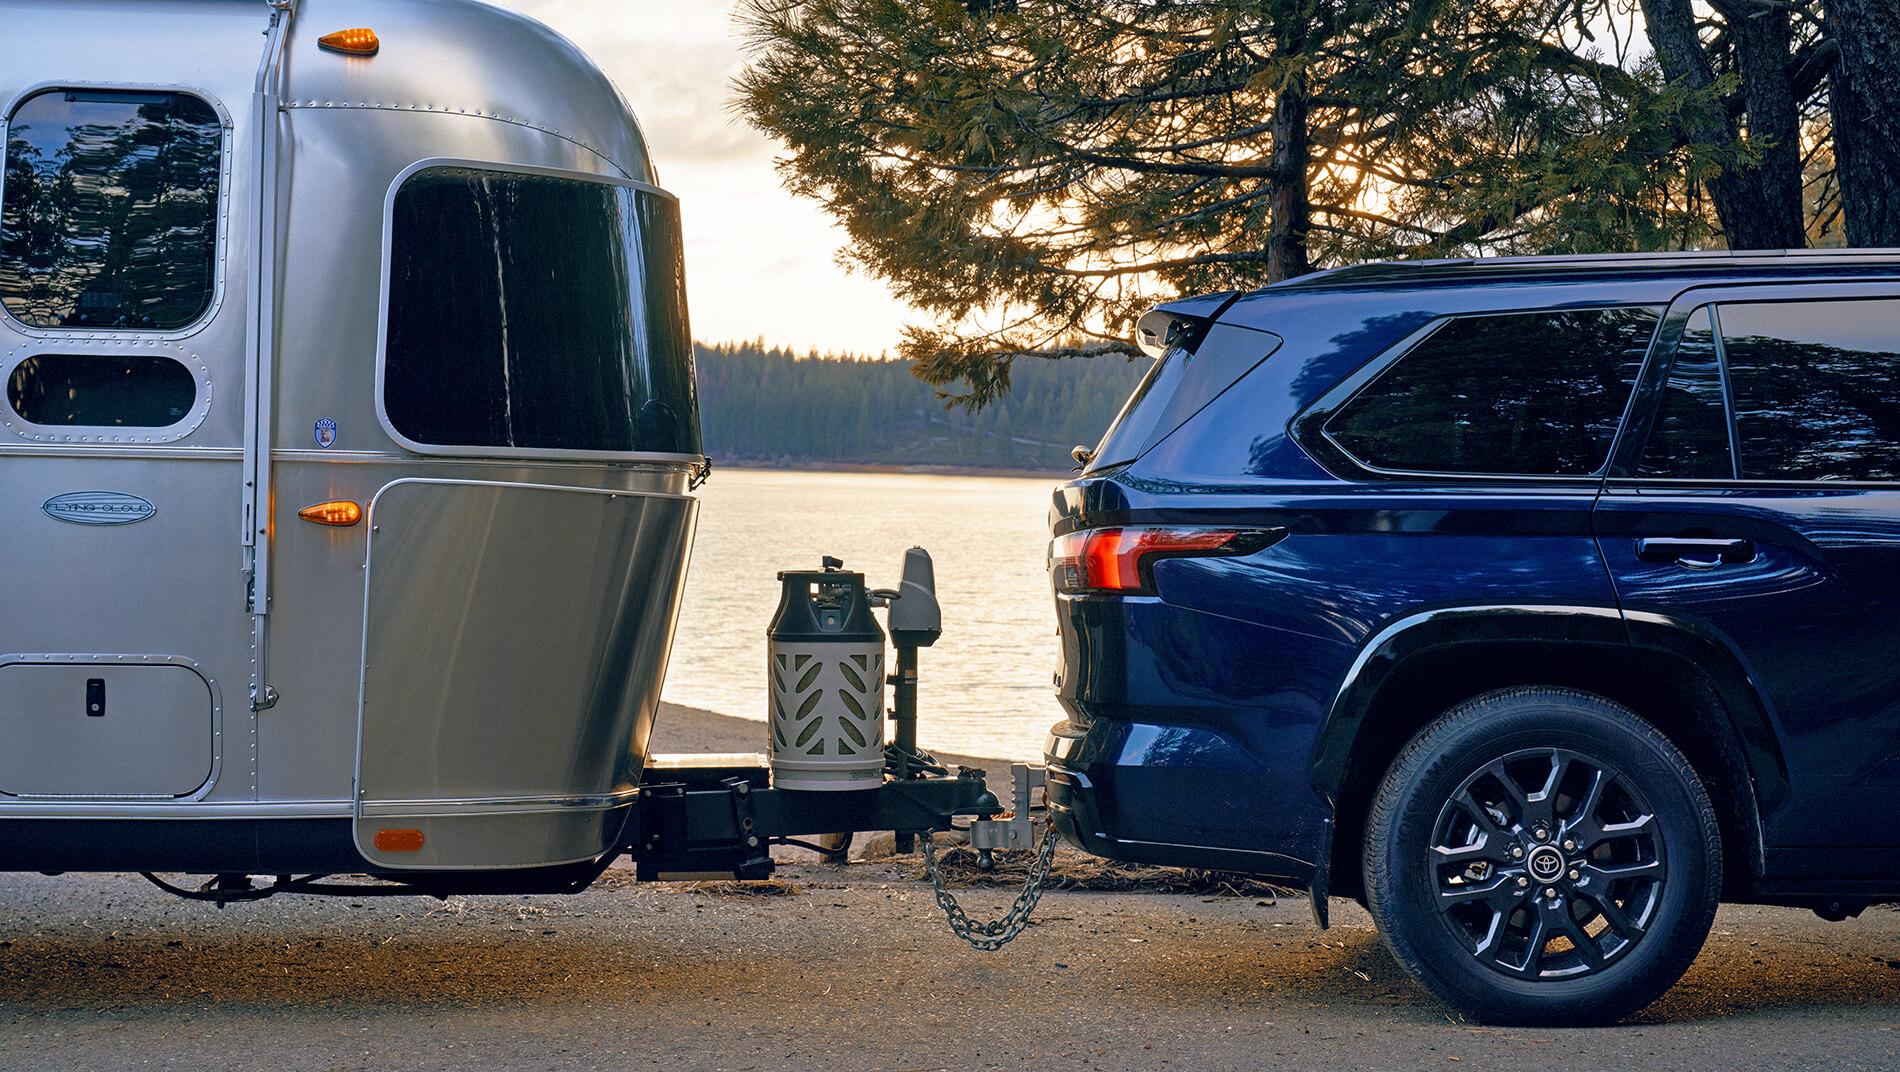 Blue Toyota Sequoia towing an airstream trailer